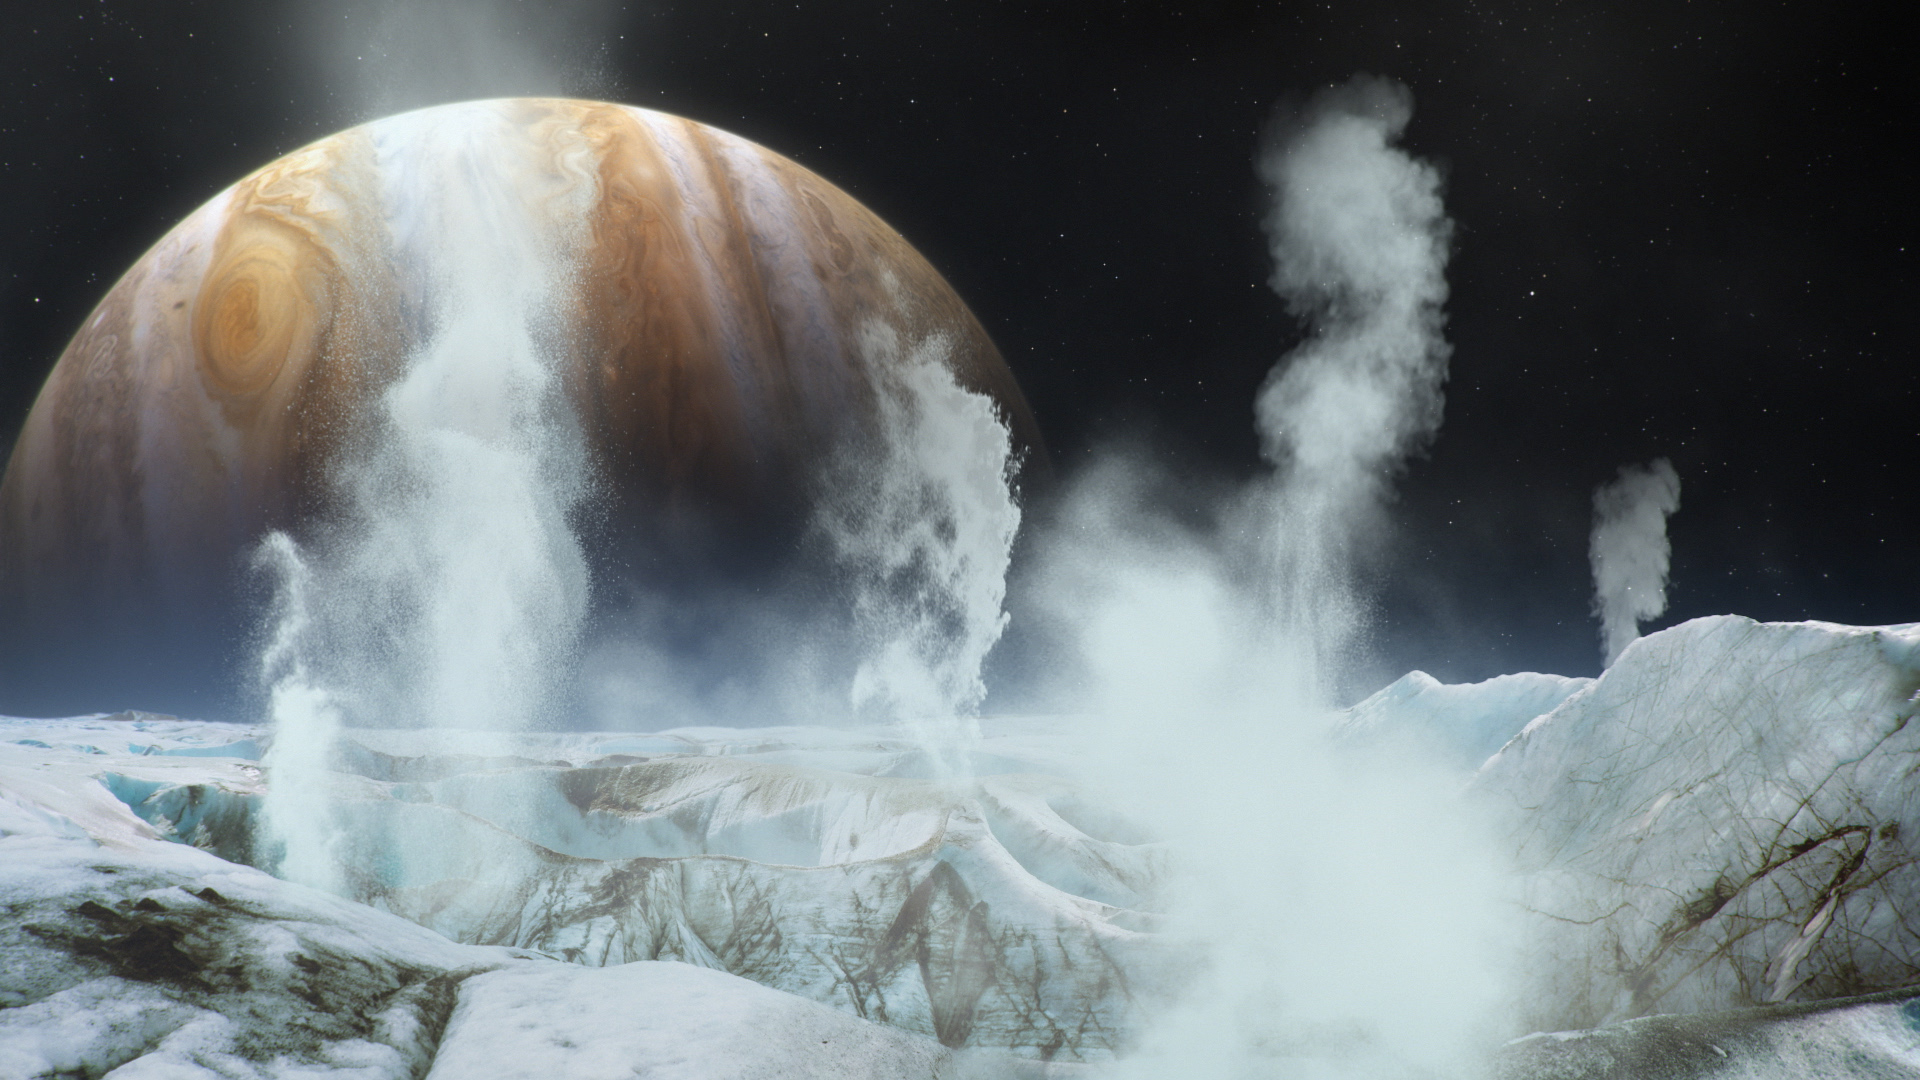 Artistic rendering of an icy moon's surface with sprays of water and jets of vapor rising into the sky. Planet Jupiter hangs in the background.